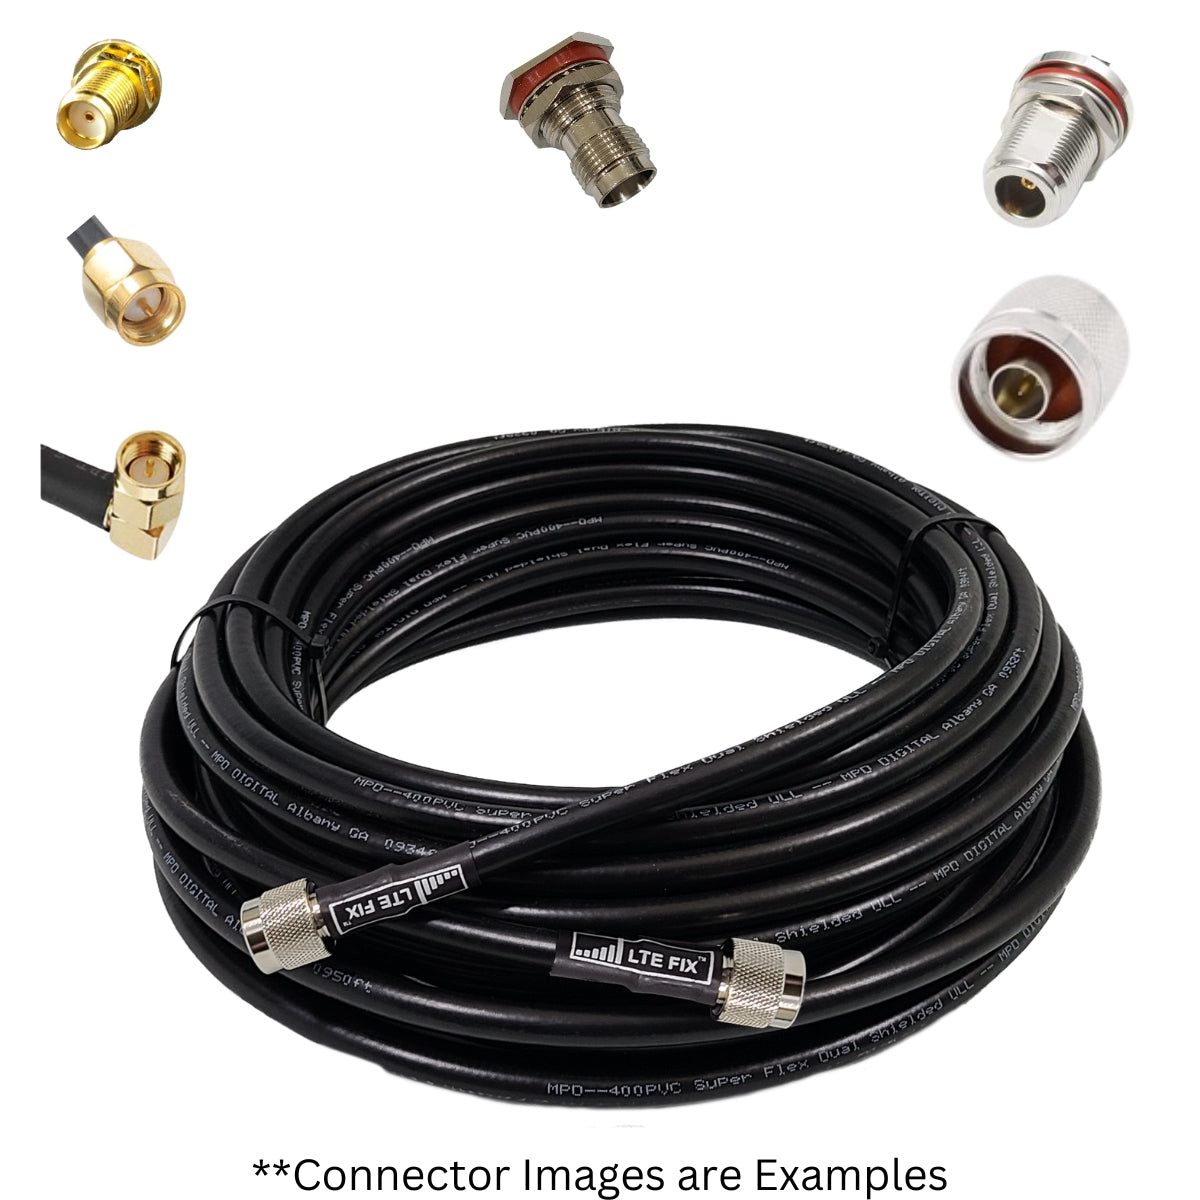 Coax Antenna Cabling - High Quality - Low Loss - Made in the USA